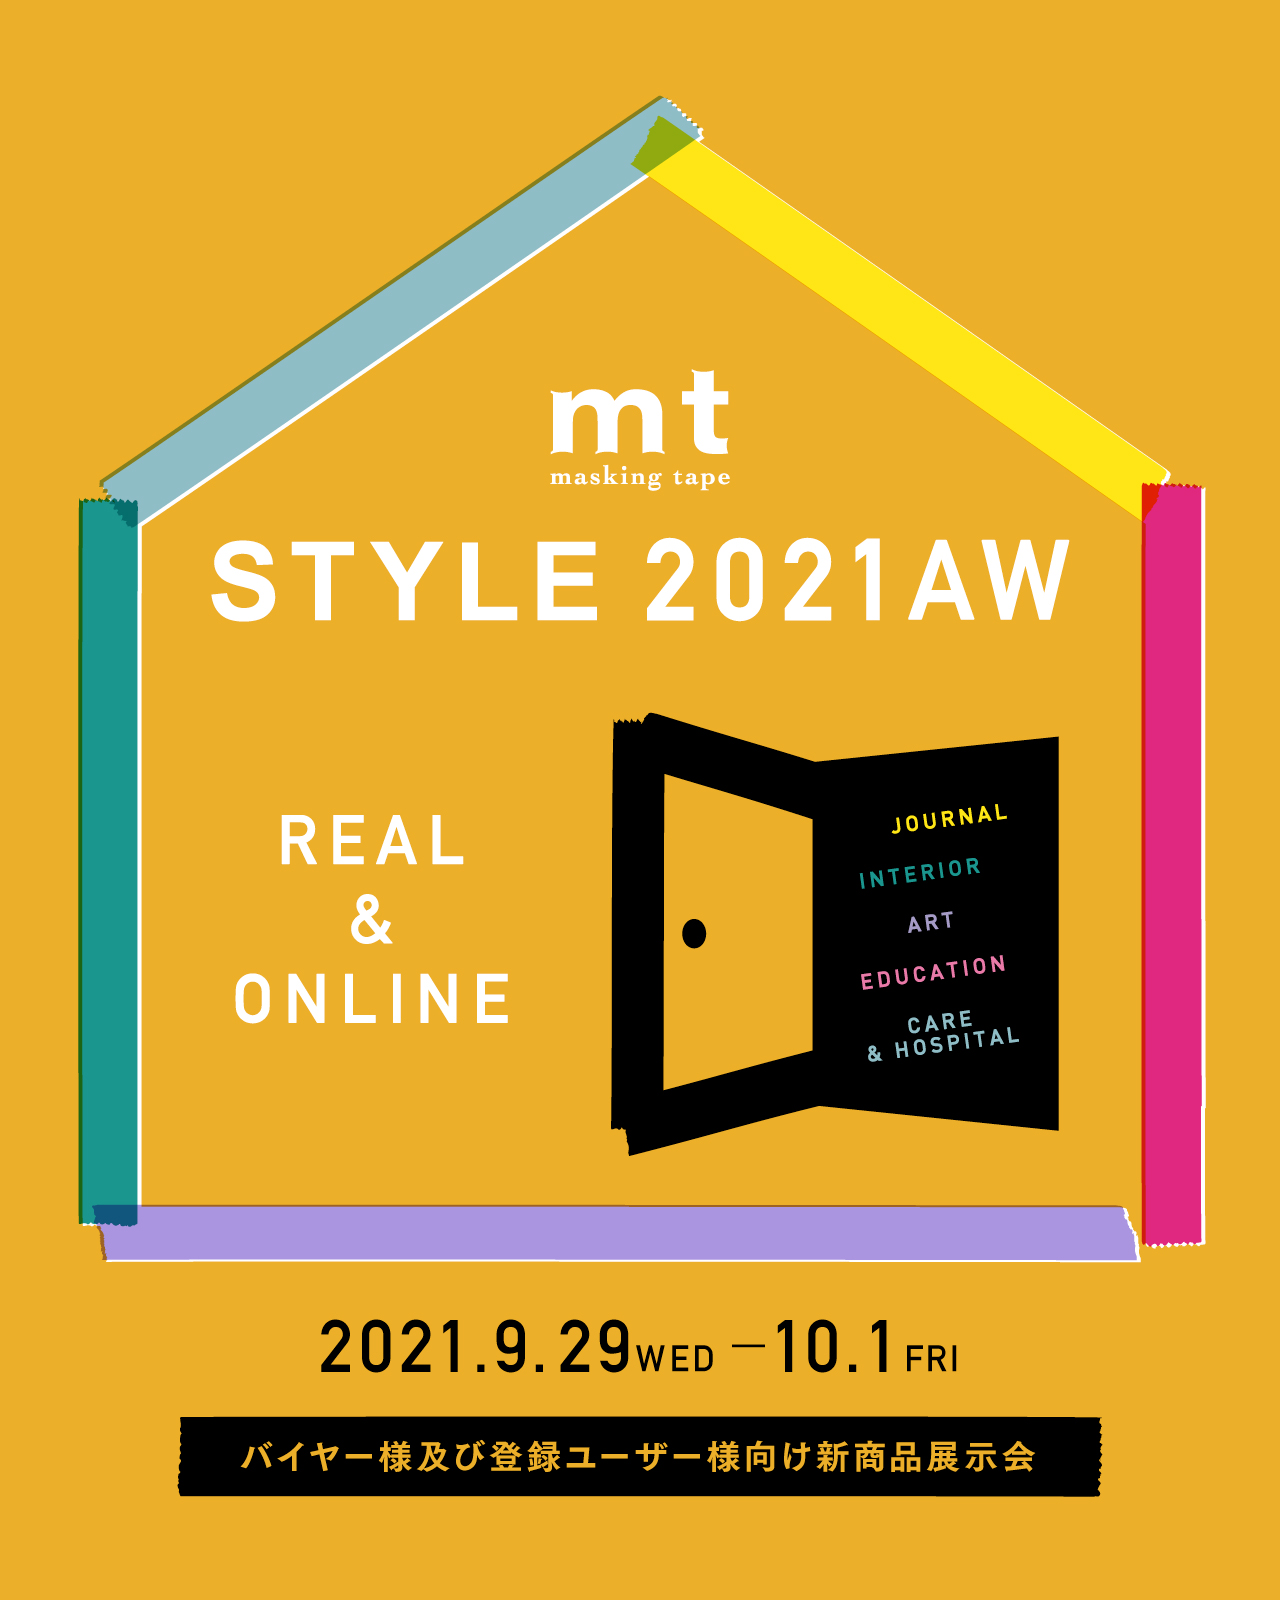 mt STYLE 2021AW REAL&ONLINE 2021.9.29WED-10.1FRI